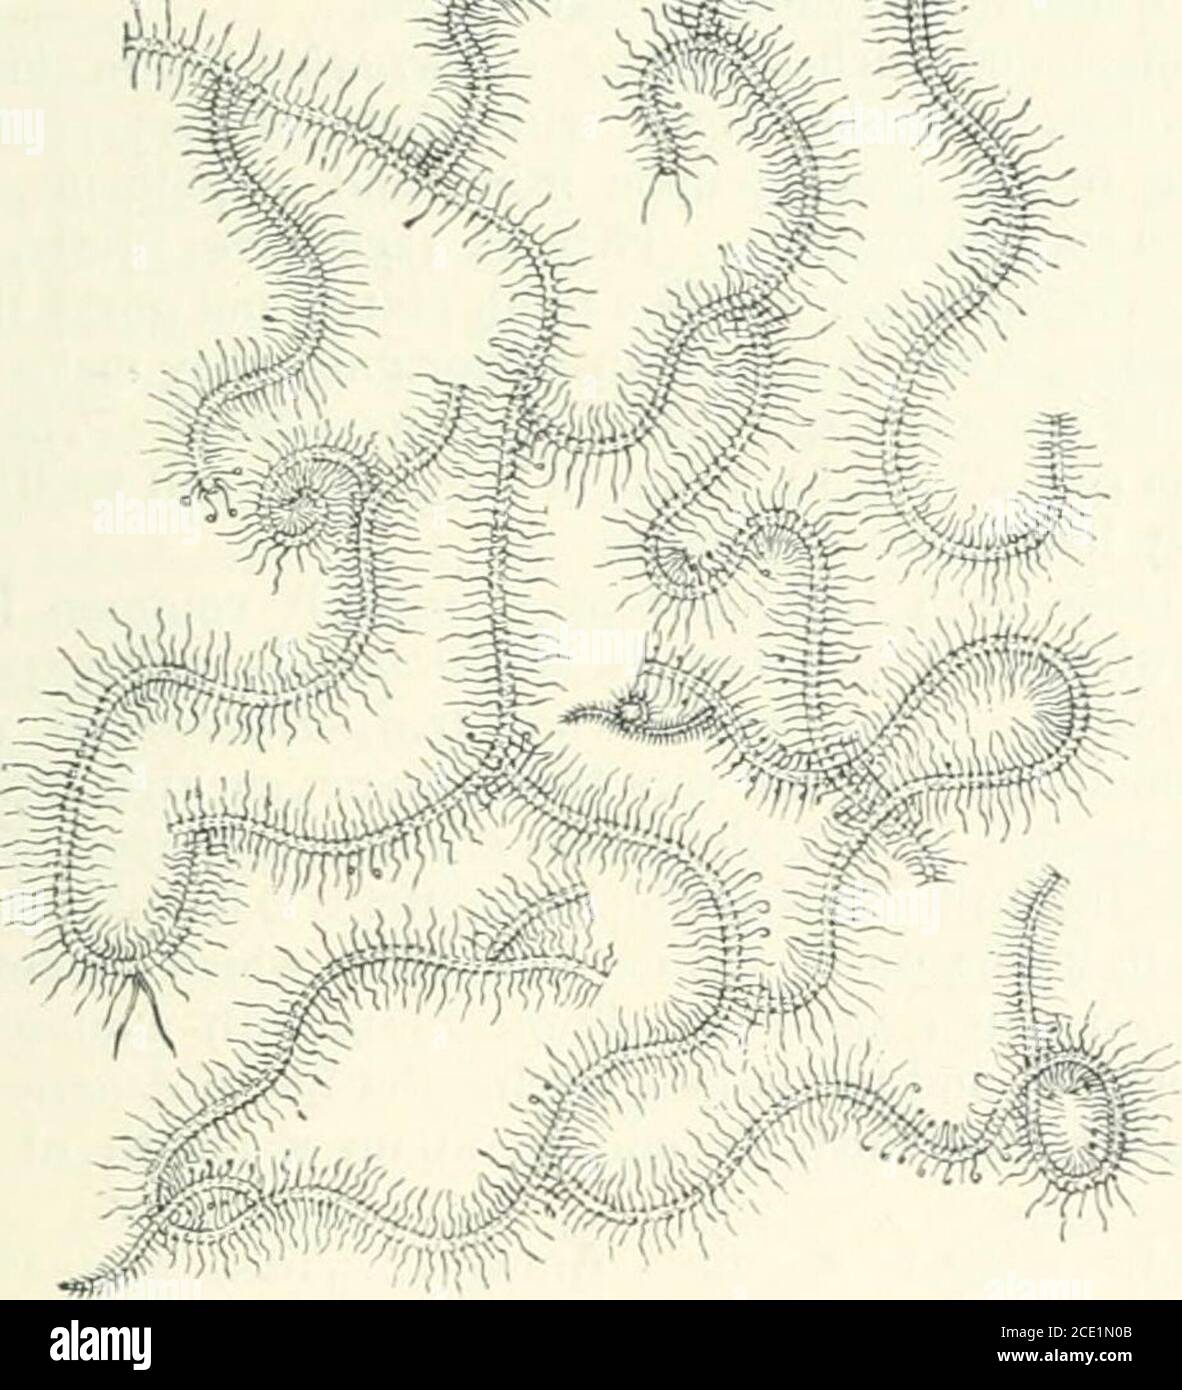 . The study of animal life . me Nereids)and the lobworms which burrow and make countless castings uponthe flat sandy shores, or those which inhabit tubes of lime orsandy particles (e.g. Serpida, Spirorbis, and La7iice or Terebellaconchilegd). The earthworms with comparatively few bristles(Oligochxta) are bisexual, while almost all the marine worms withmany bristles (Polychaeta) have separate sexes. Moreover, those ofthe first series usually lay their eggs in cocoons, within which theembryos develop without any metamorphosis, while the sea-worms,though they sometimes form cocoons, have free-swi Stock Photo